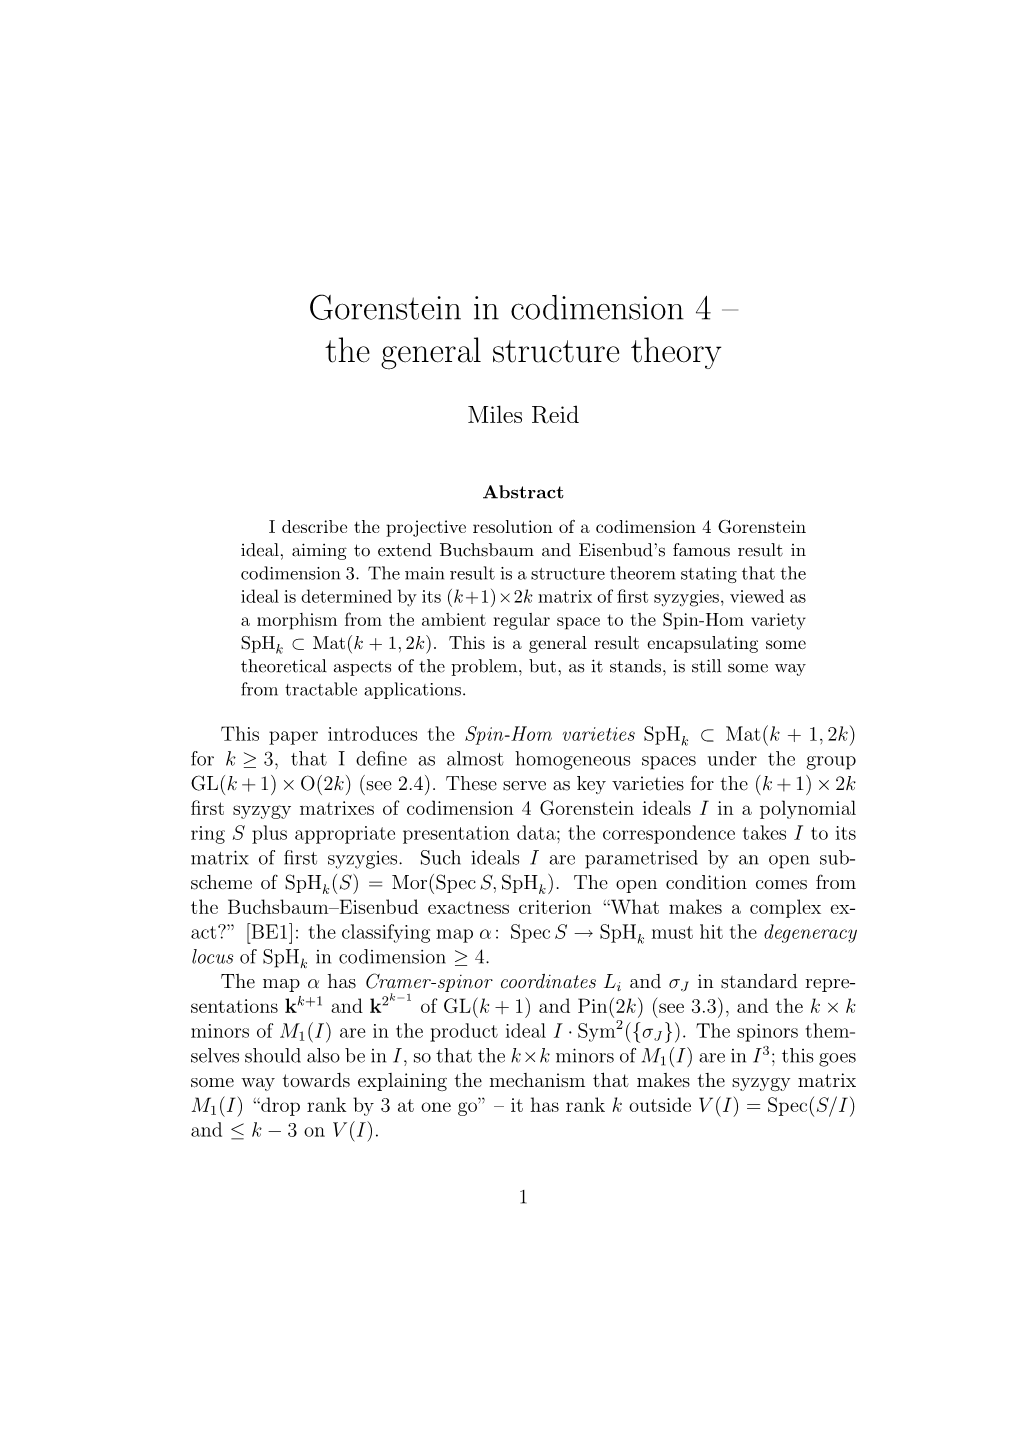 Gorenstein in Codimension 4 – the General Structure Theory